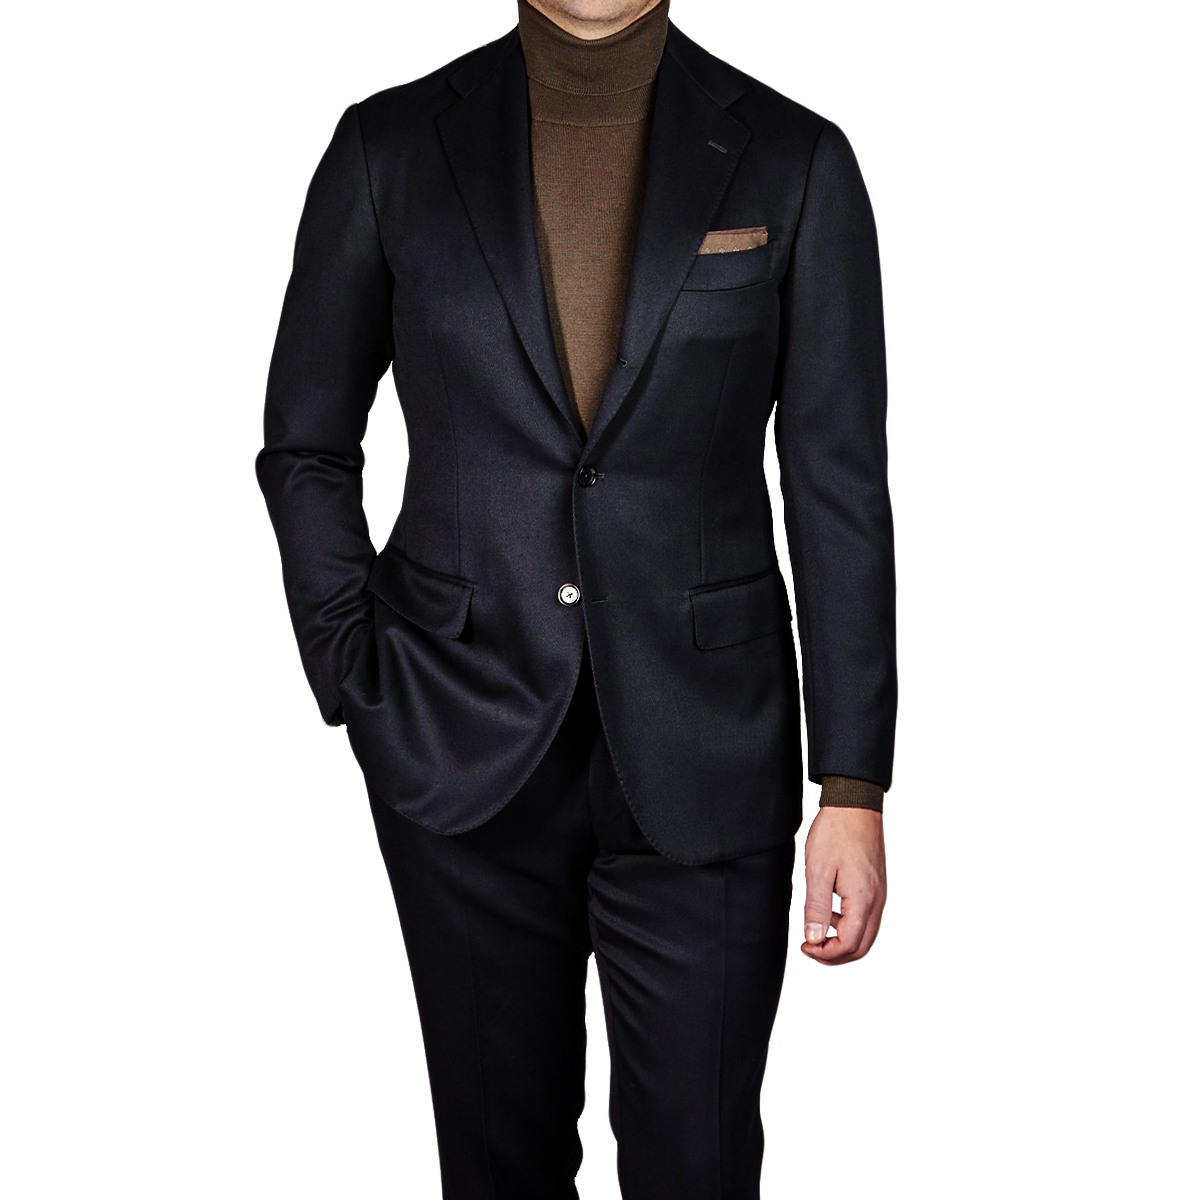 Ring Jacket Navy Calm Twist Cavalry Twill Suit – Newman's